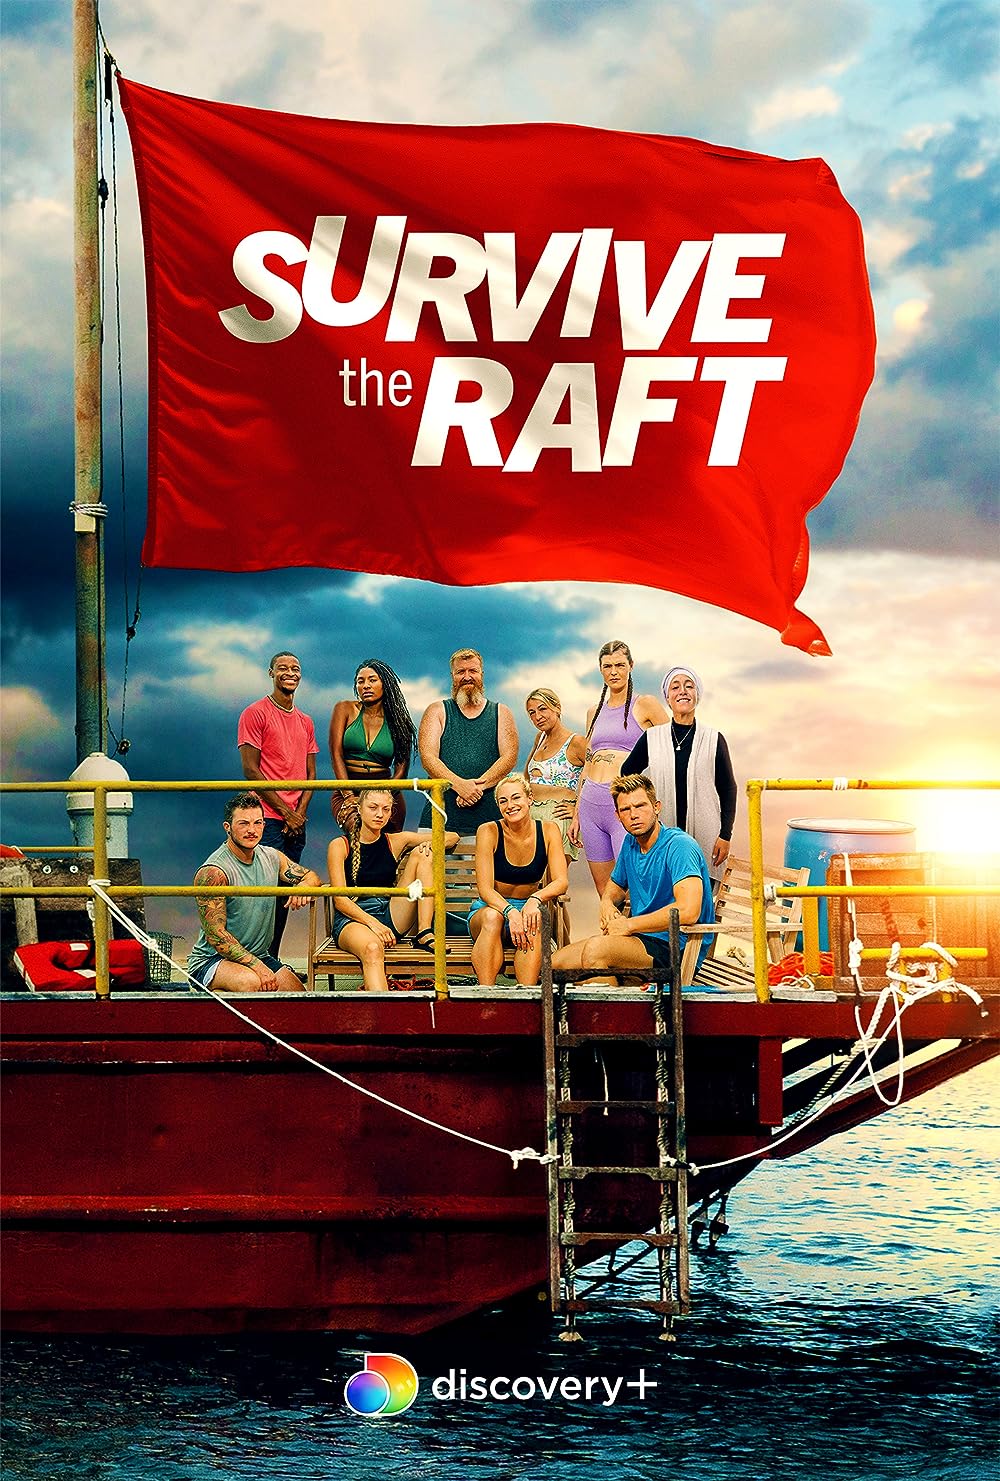 Survive the Raft